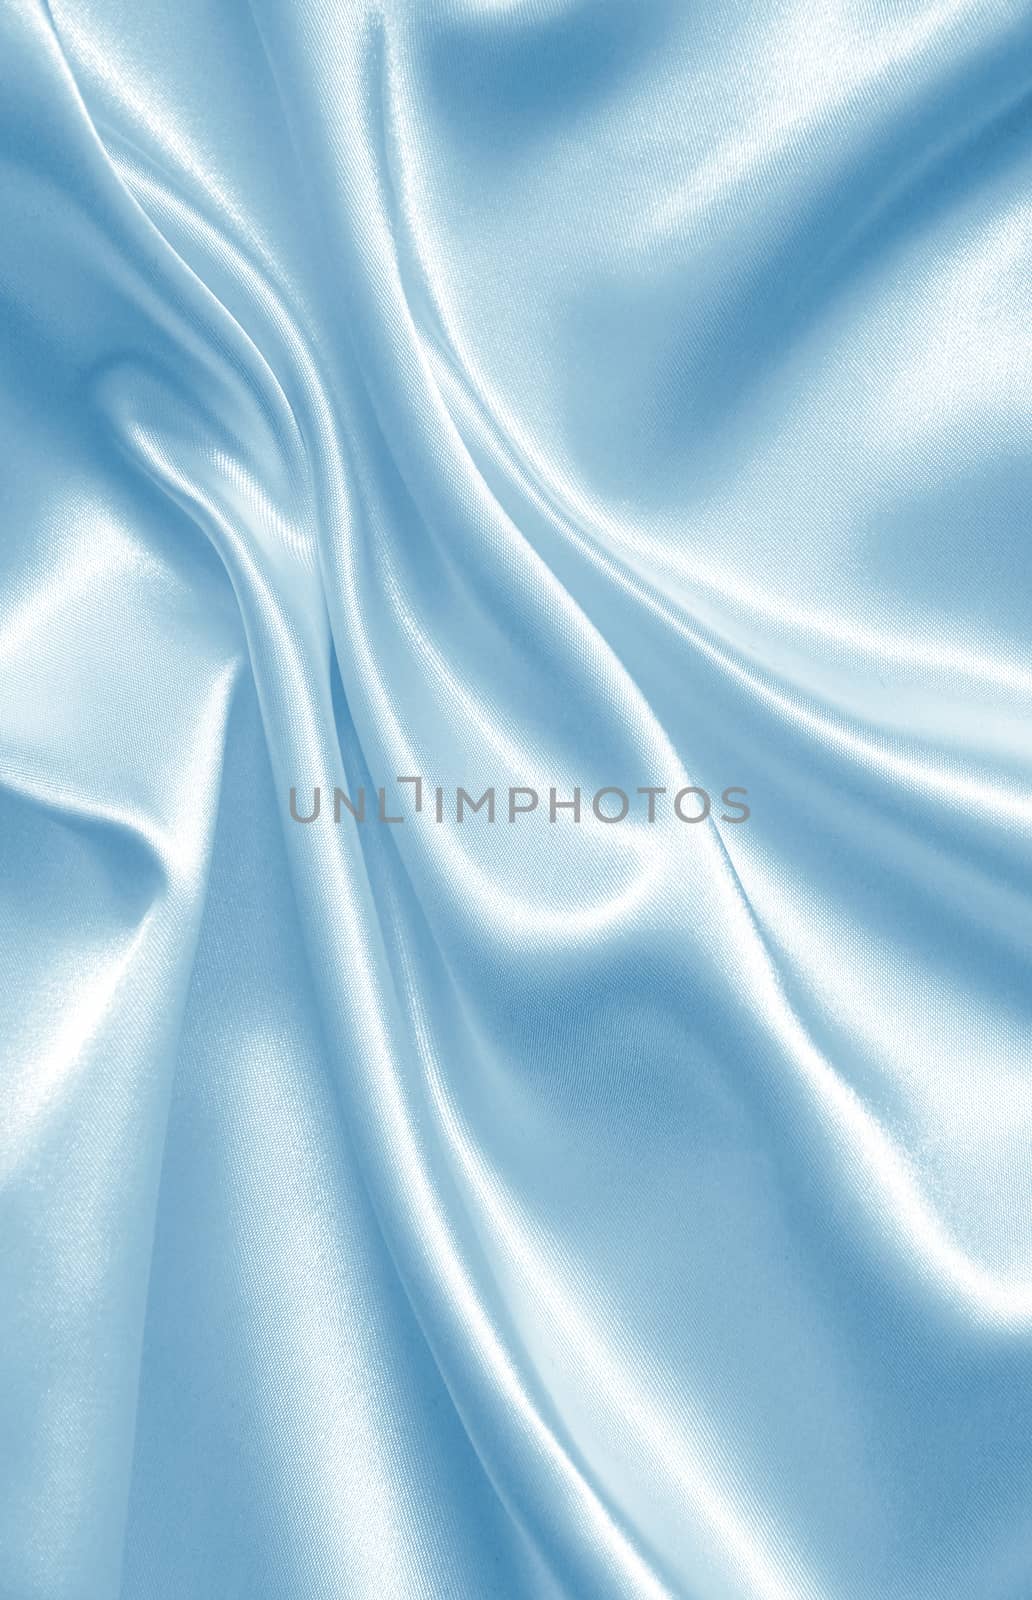 Smooth elegant blue silk or satin texture as background by oxanatravel